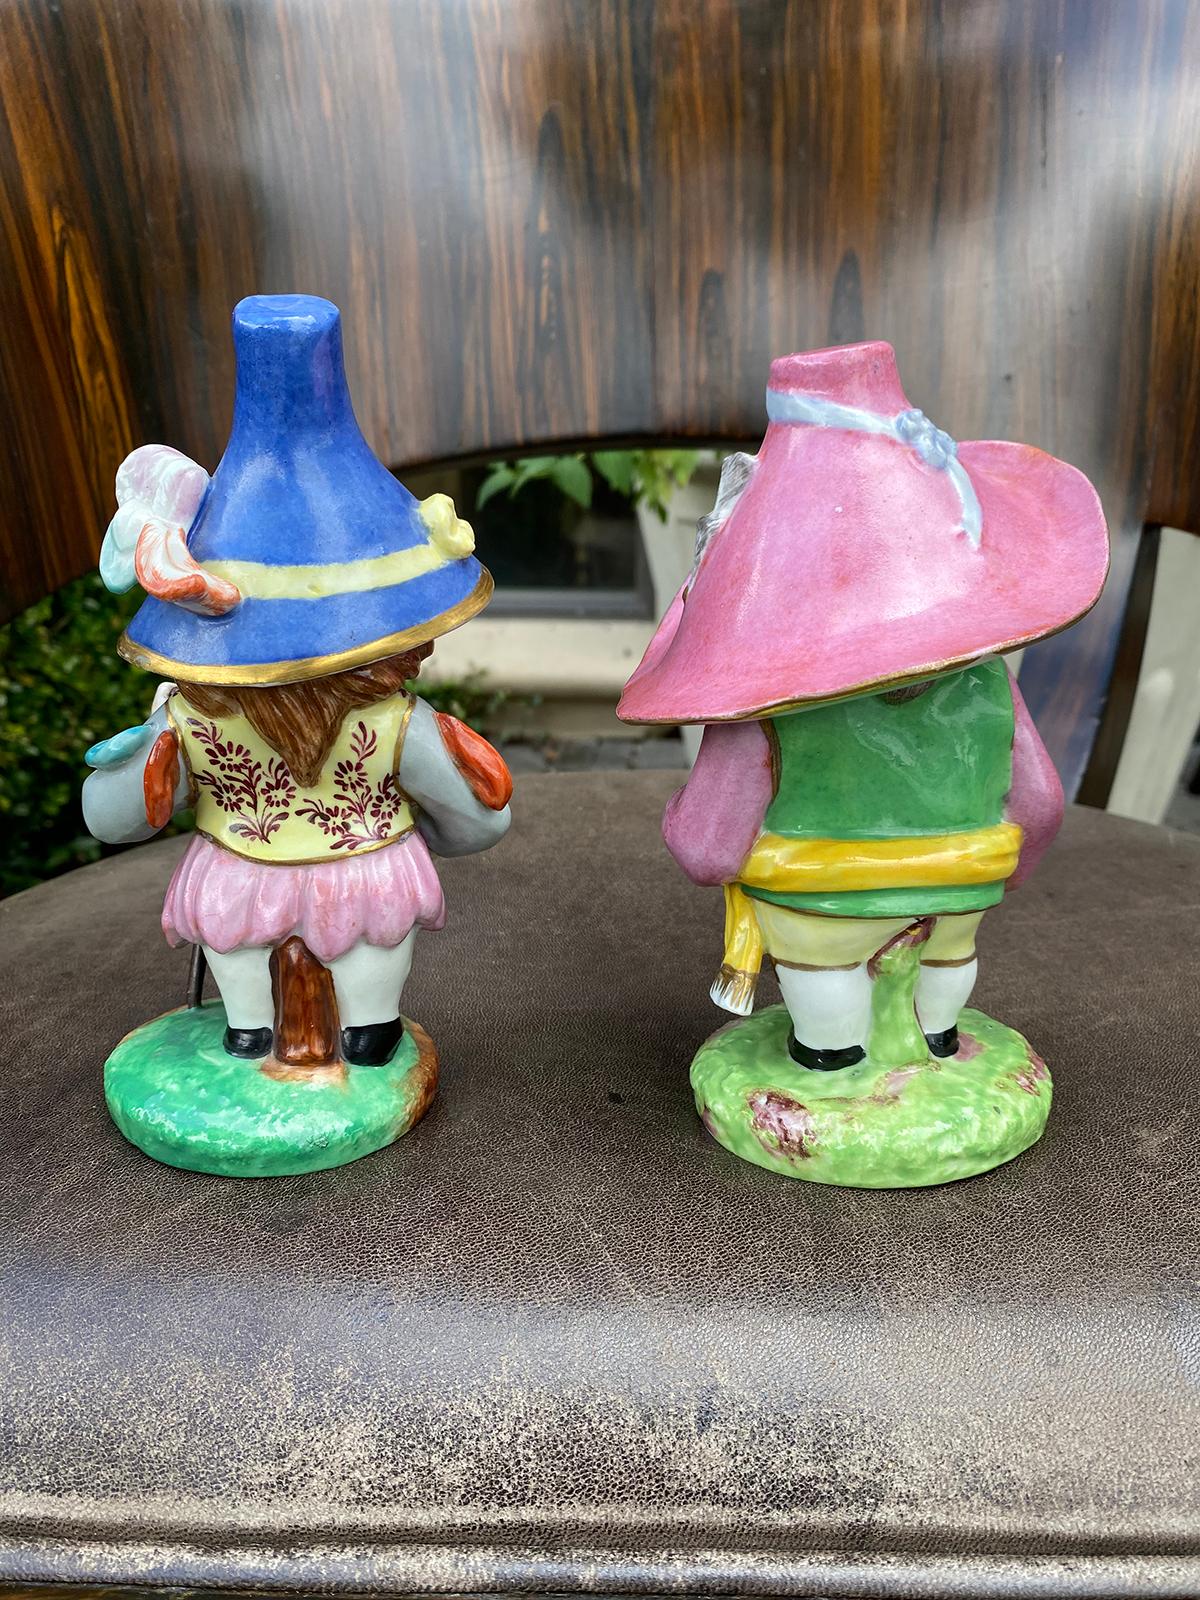 Pair of 18th Century English Attributed to Derby Porcelain Dwarfs For Sale 3